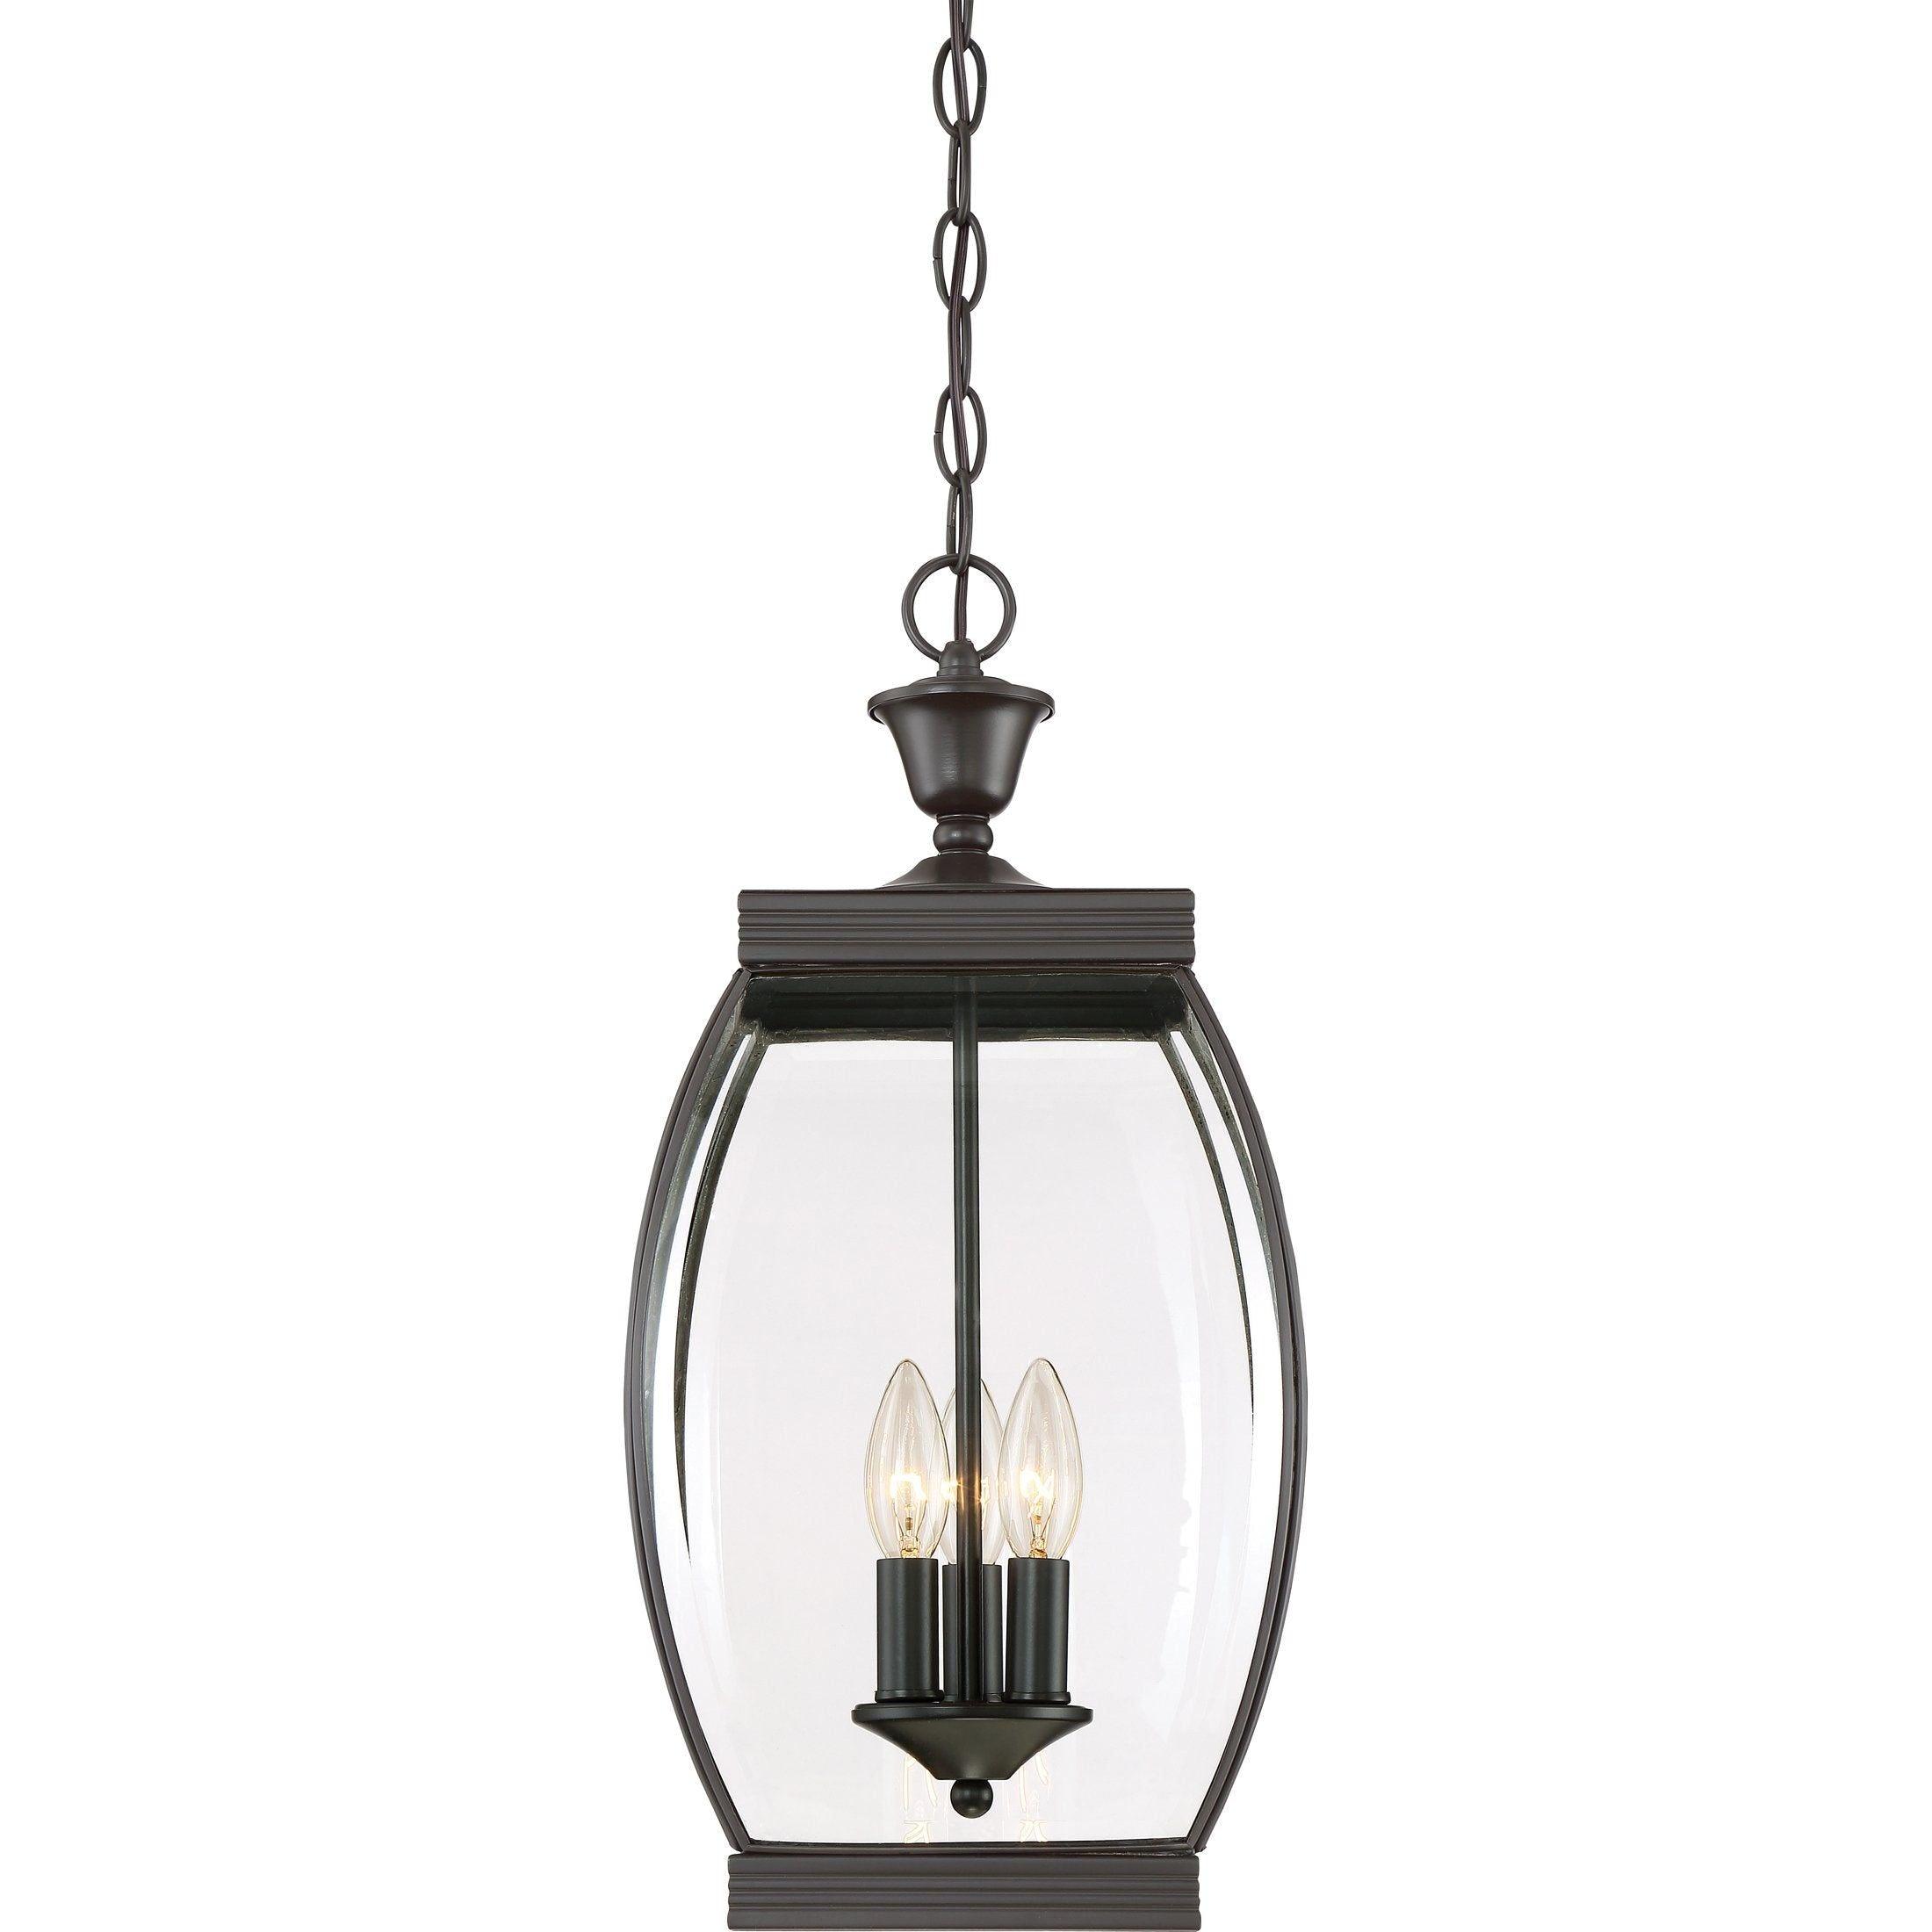 Quoizel - Oasis Outdoor Pendant - Lights Canada